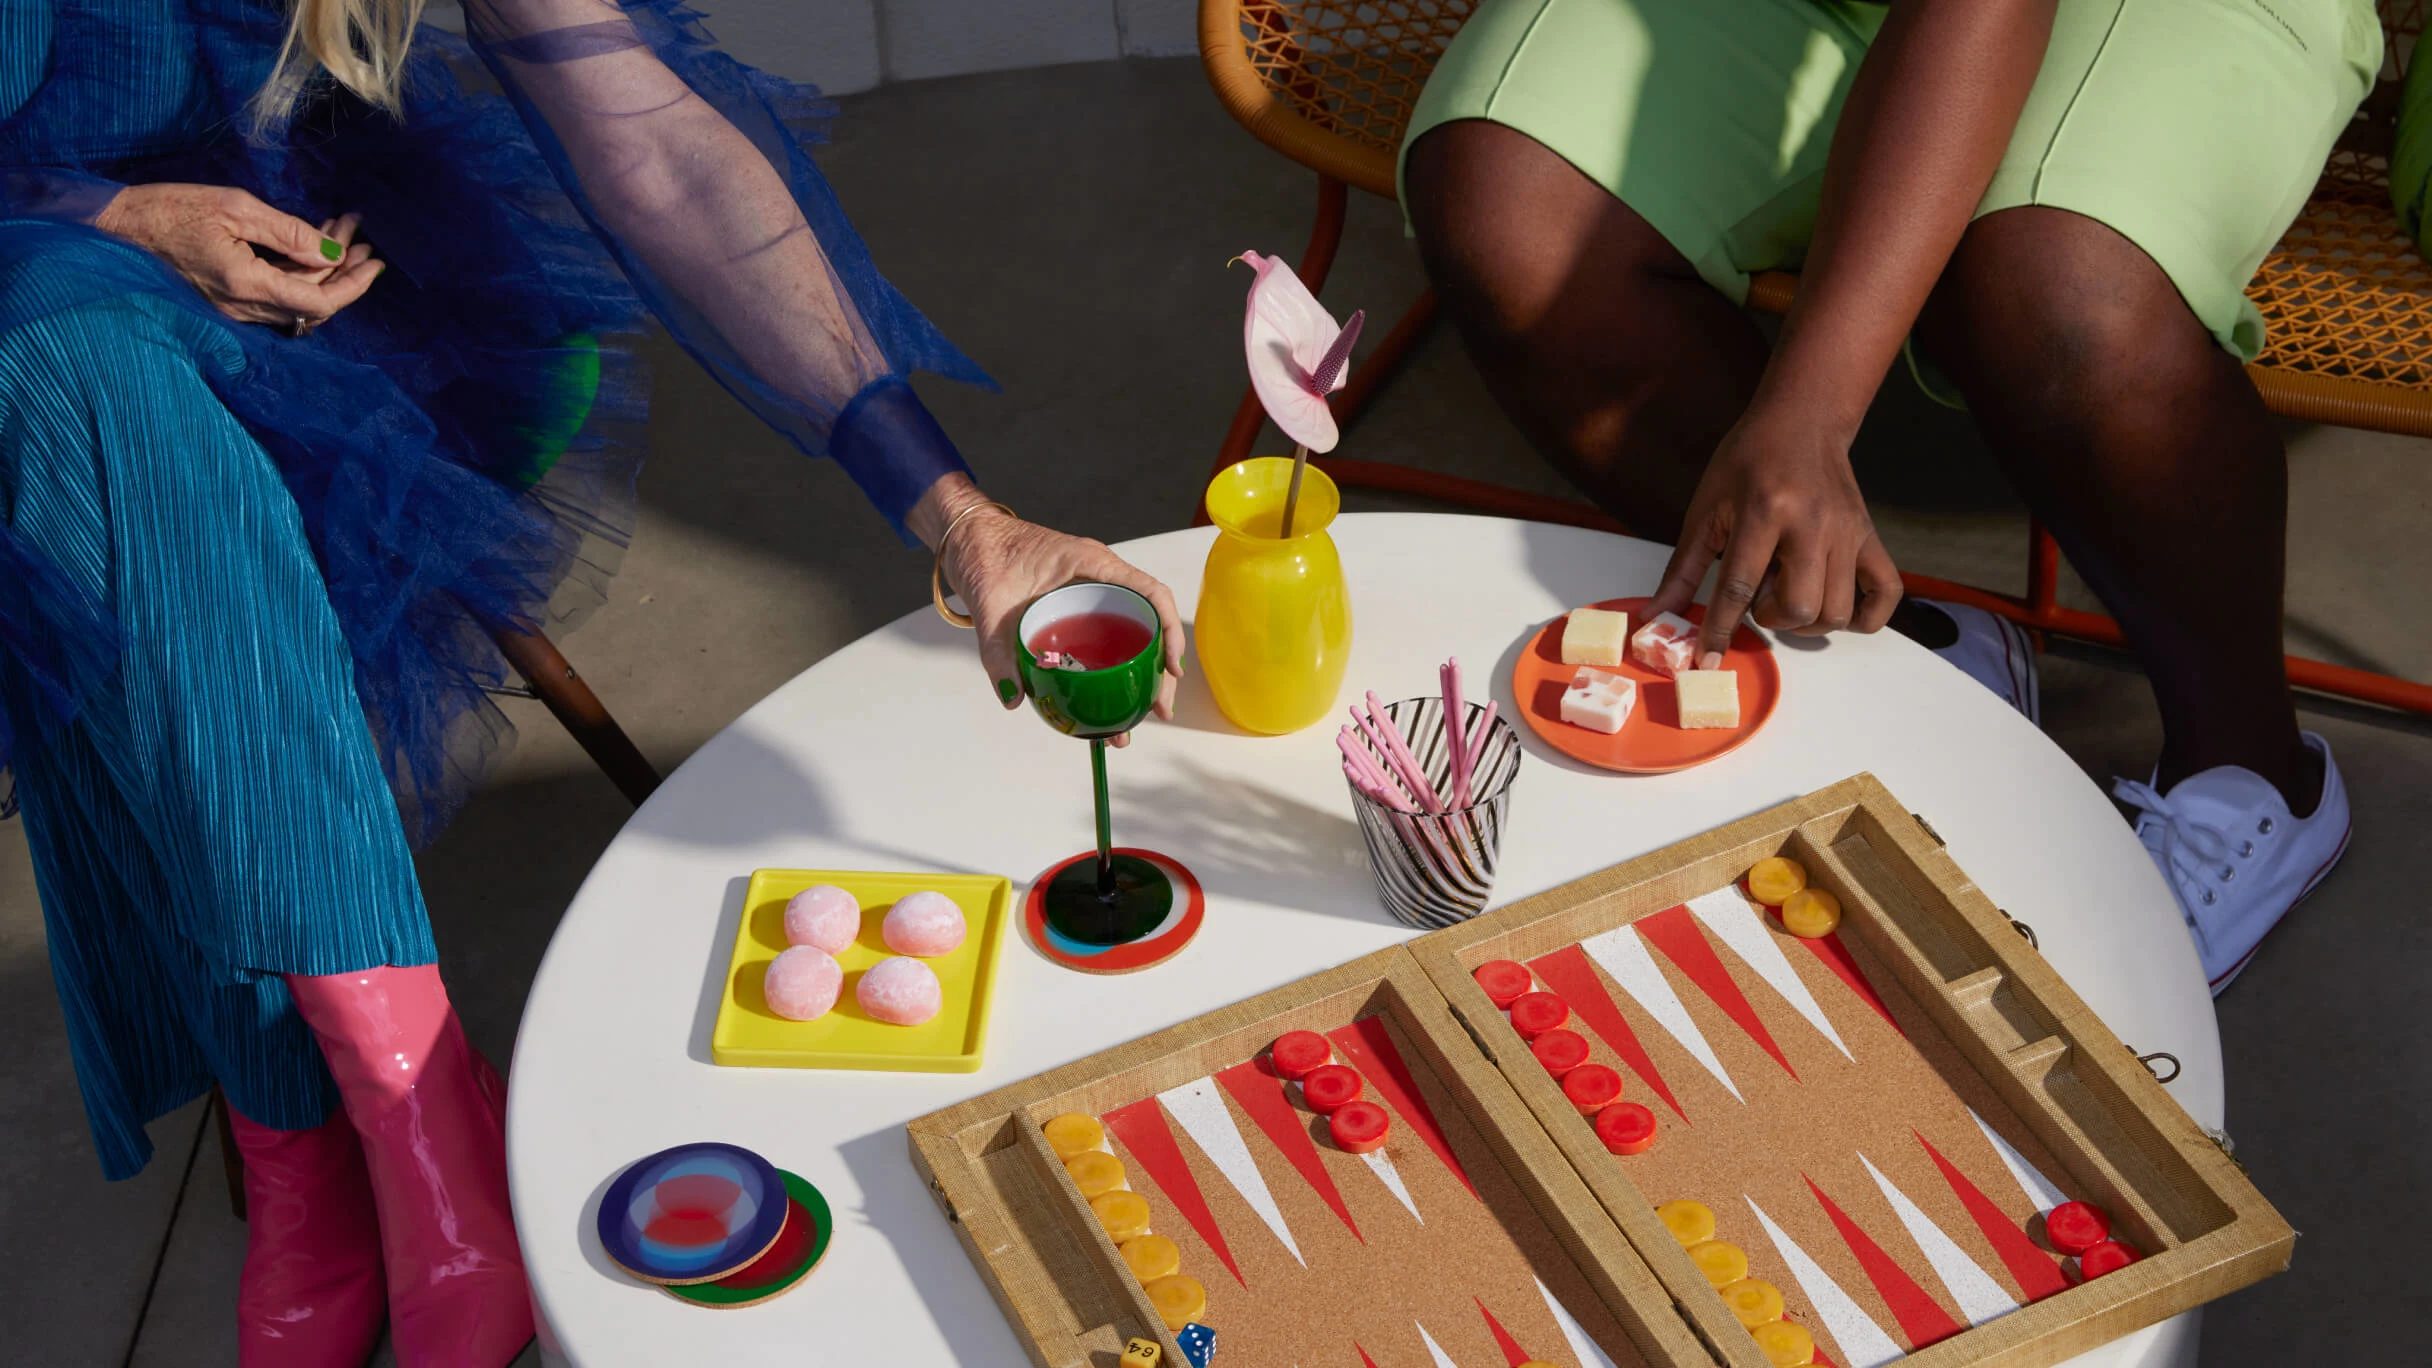 Two friends dressed in colourful outfits sit around a low white outside table playing a board game, drinking fruity drinks and eating delicious snacks. A flower in a yellow vase is on the table while pink paper straws sit in a black and white striped cup.